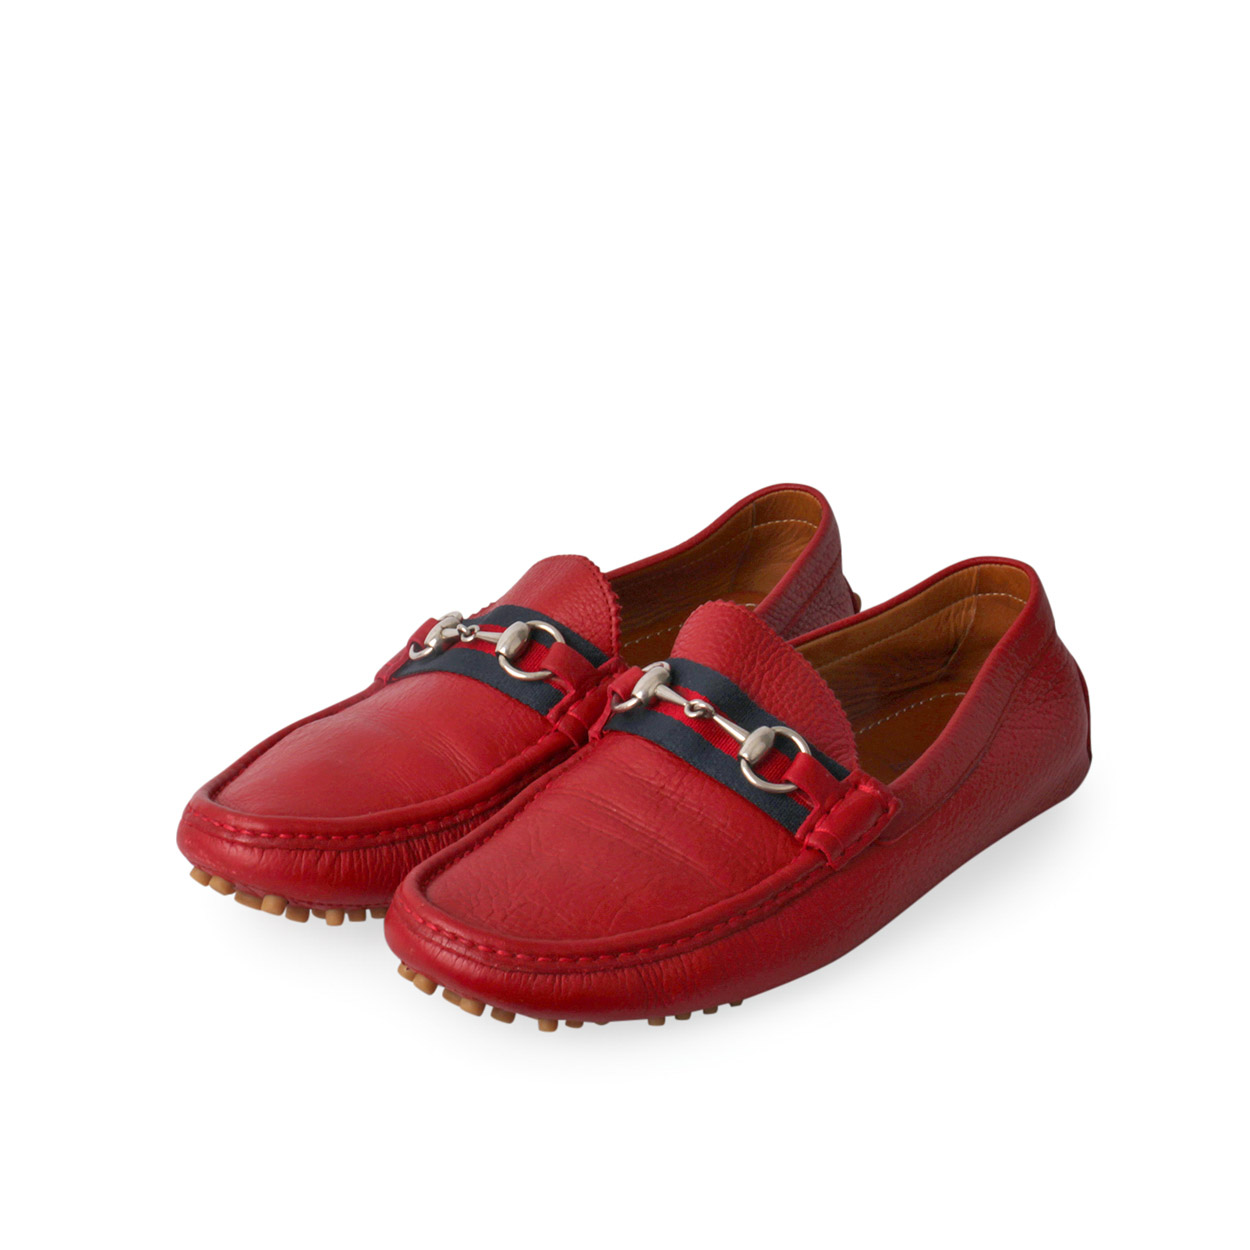 GUCCI Pebbled Leather Horsebit Loafers 